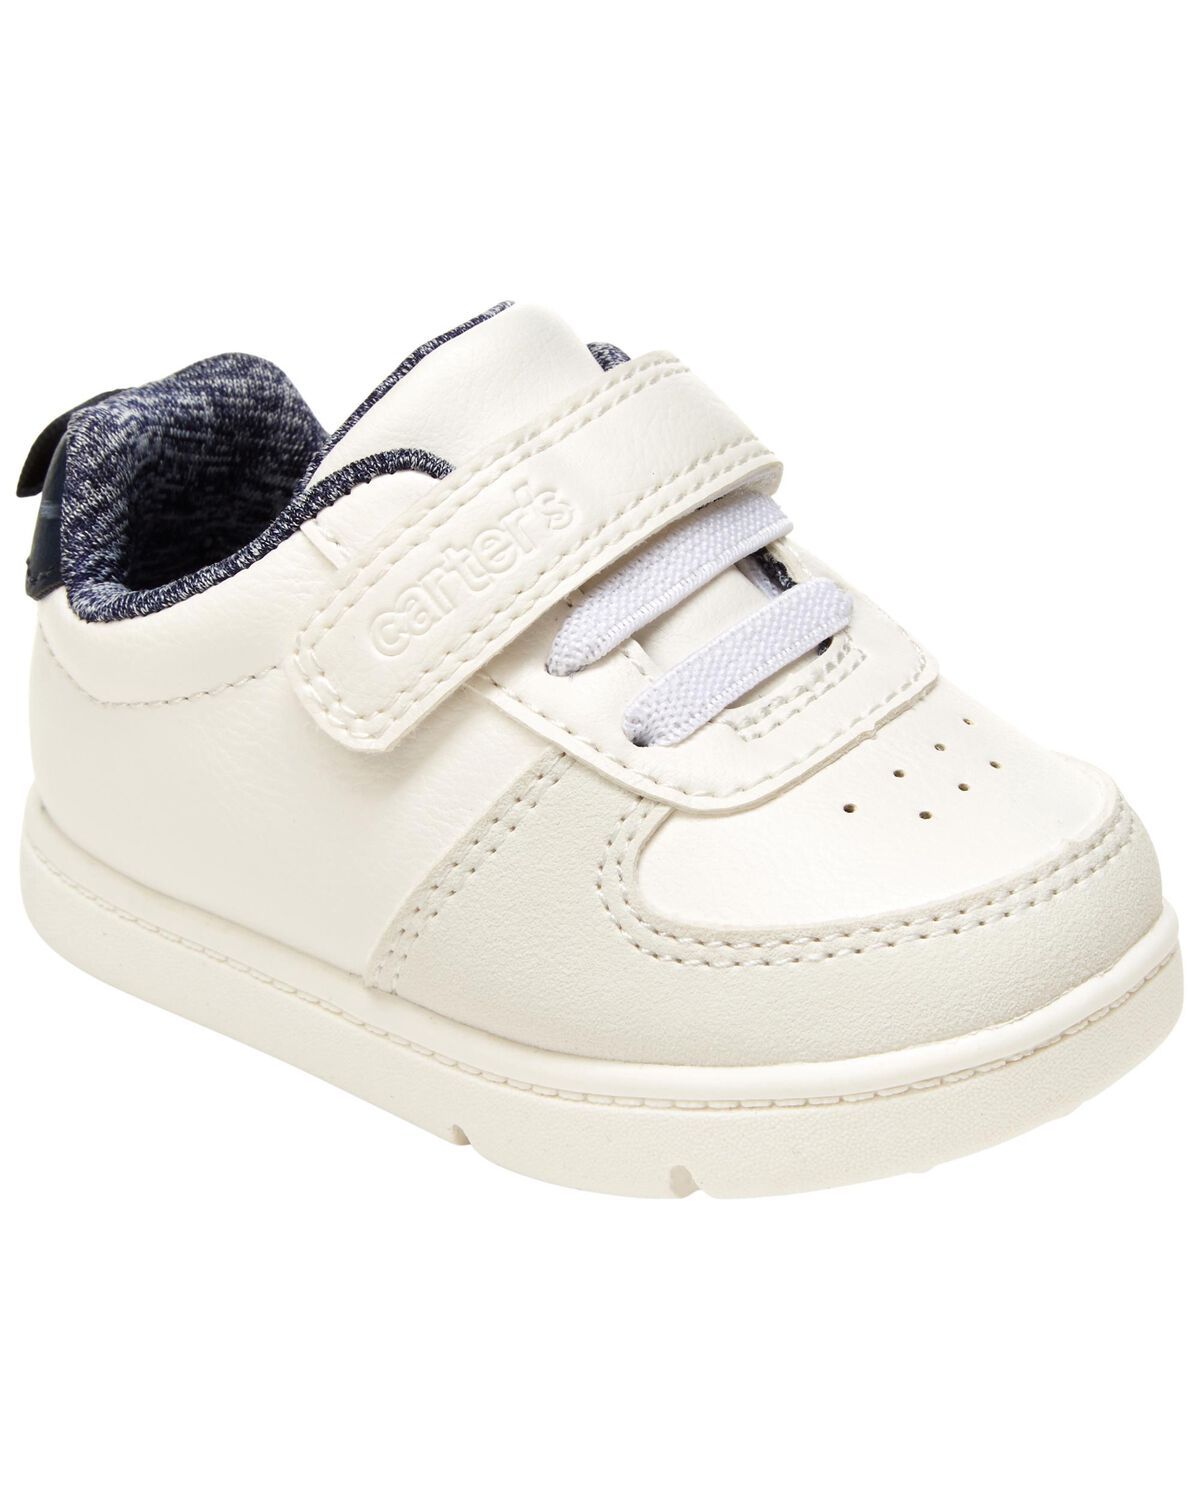 Baby Every Step® Sneakers | Carter's